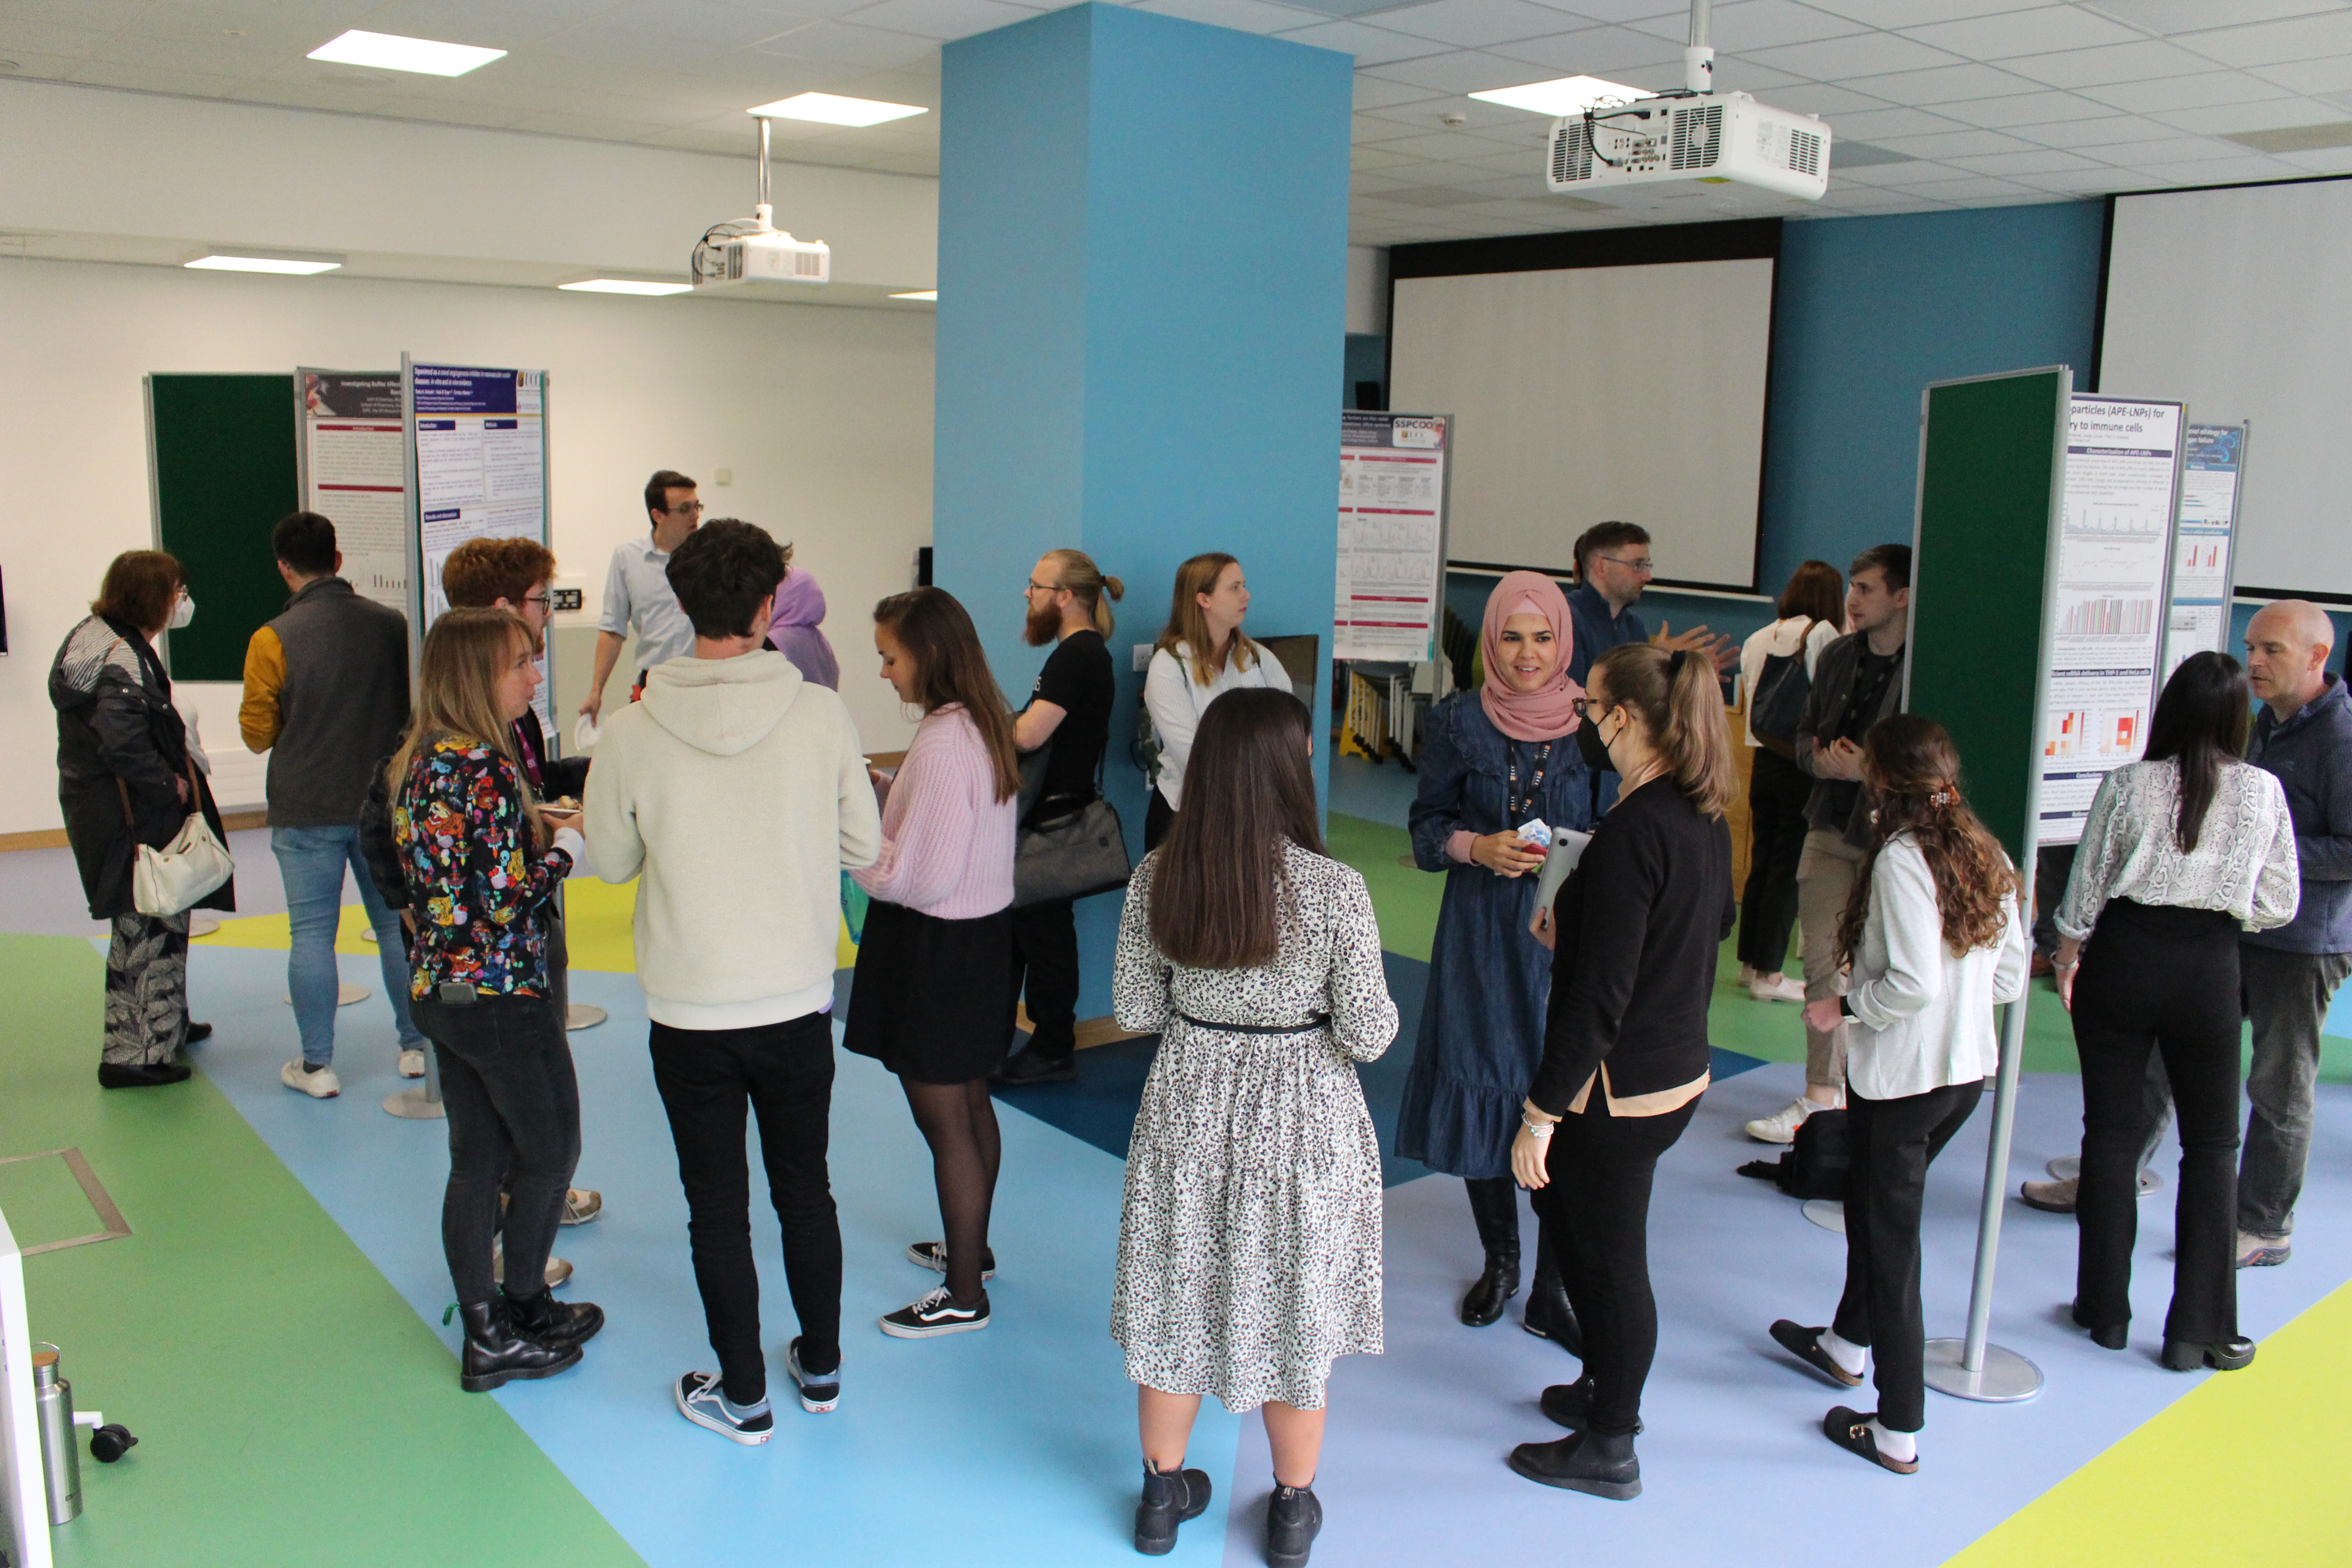 Well done to all our postgraduate research students who presented their research at the School of Pharmacy Research Day on Sept 6th 2022.